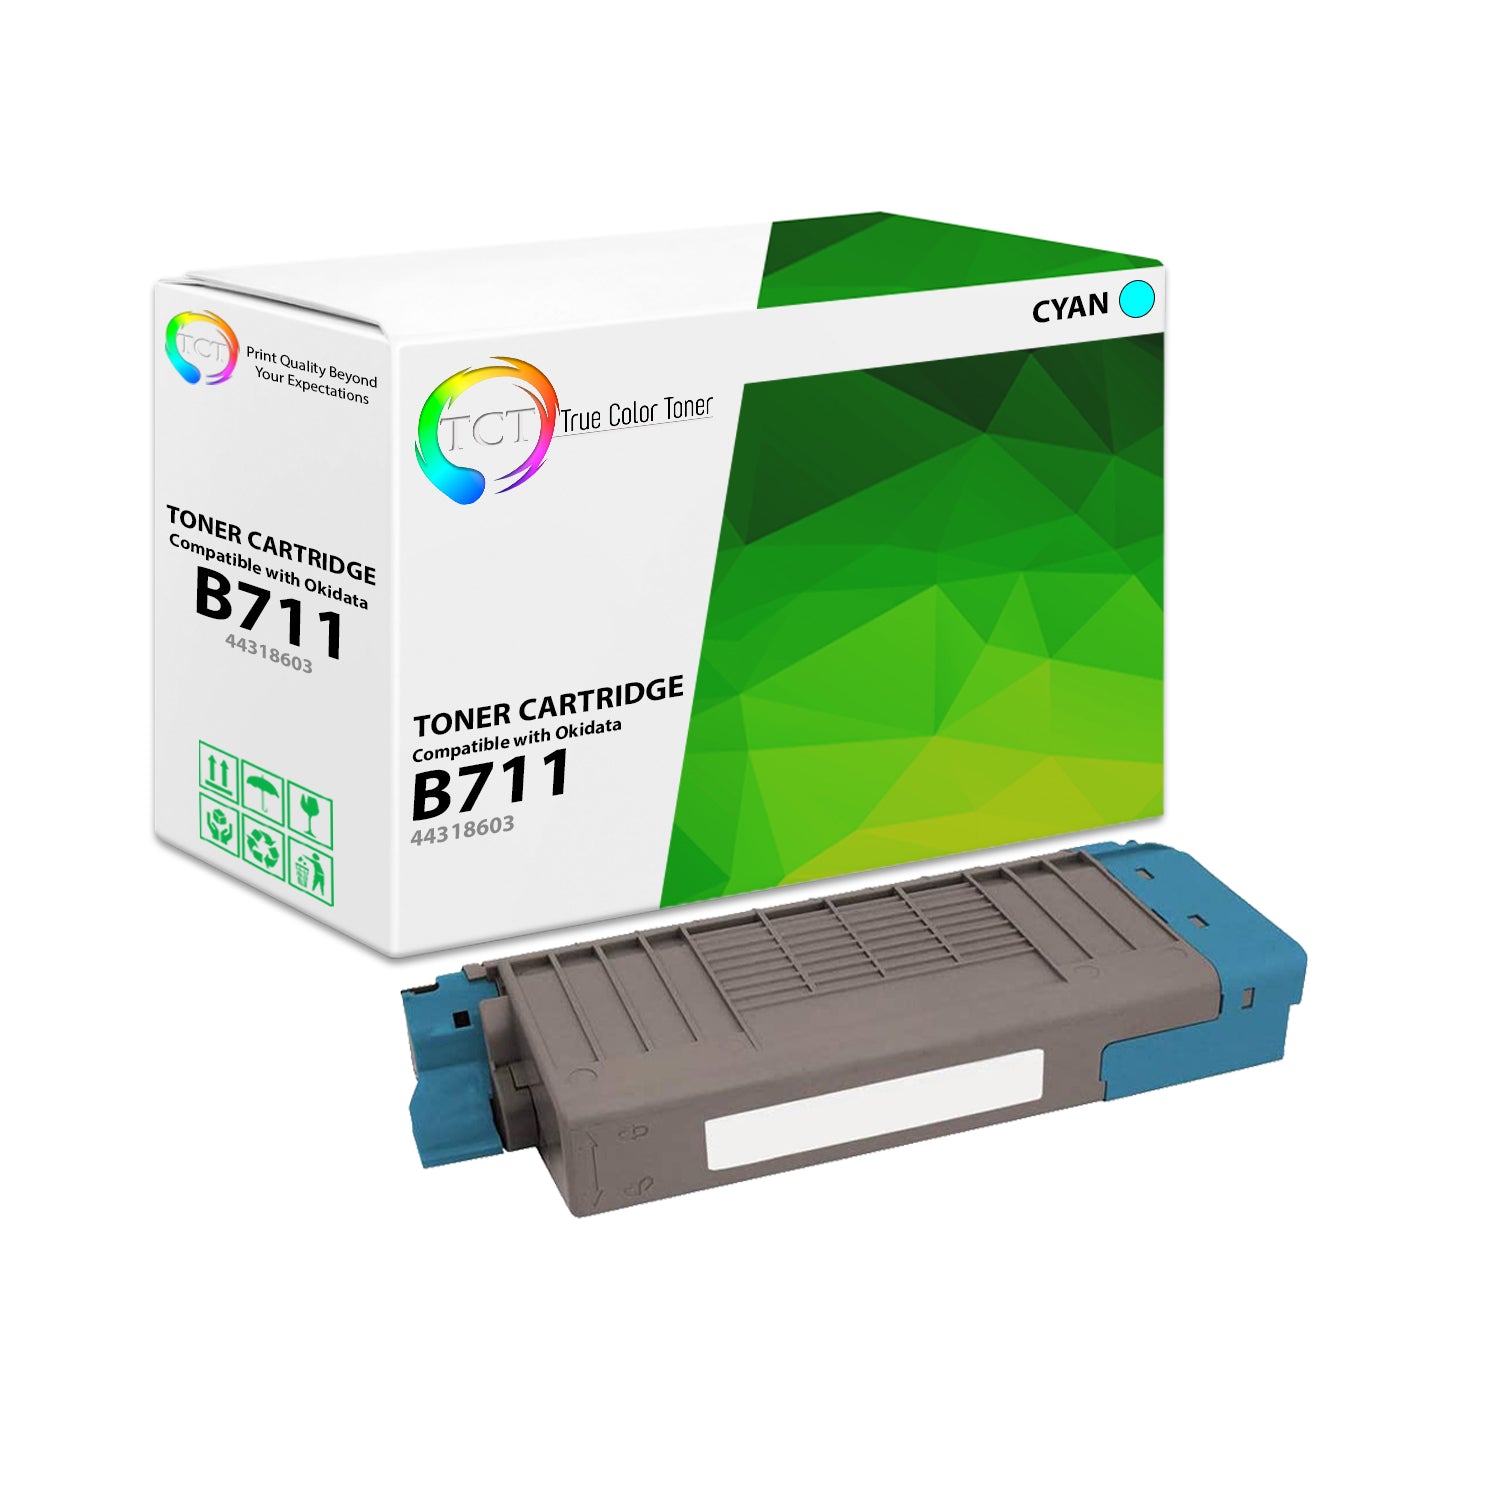 TCT Compatible Toner Cartridge Replacement for the Okidata C711 Series - 1 Pack Cyan